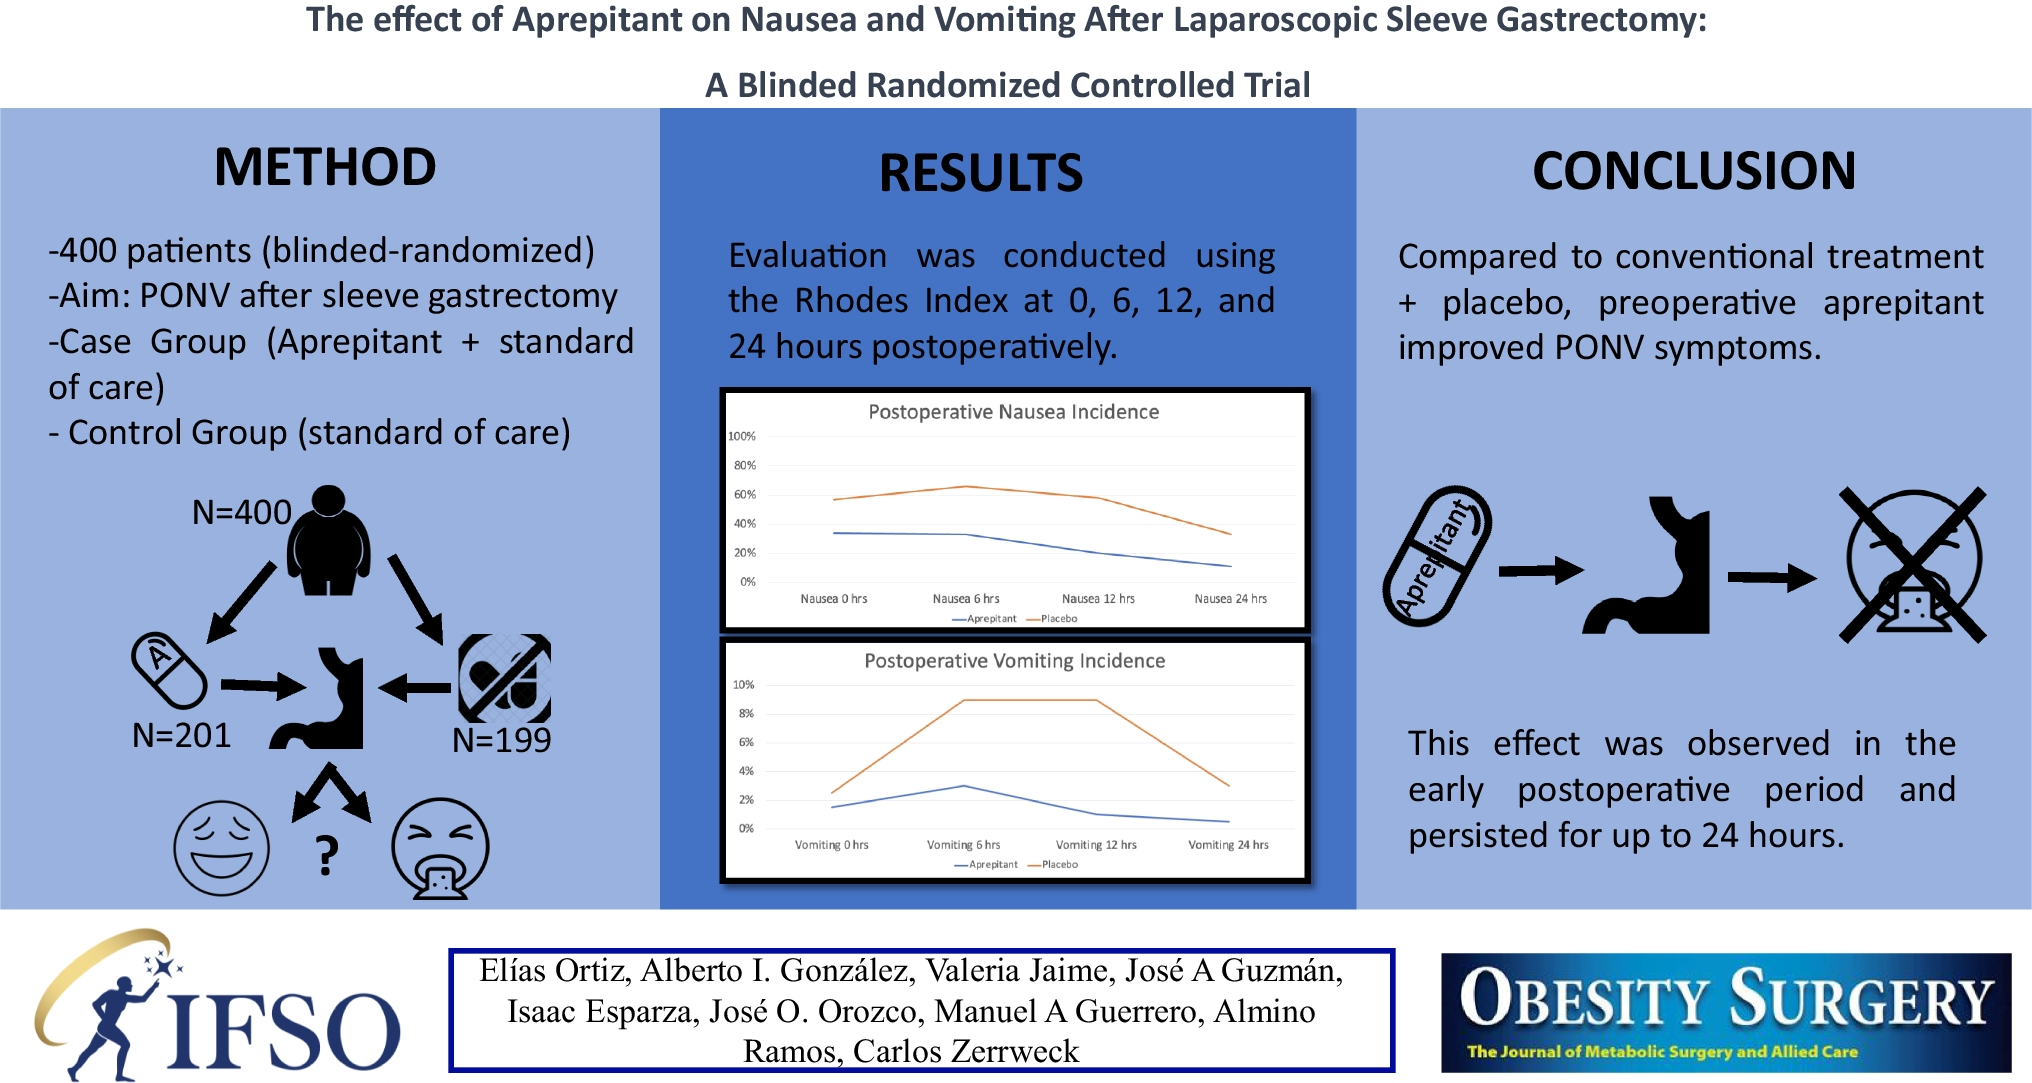 The impact of Aprepitant on Nausea and Vomiting following Laparoscopic Sleeve Gastrectomy: A Blinded Randomized Controlled Trial